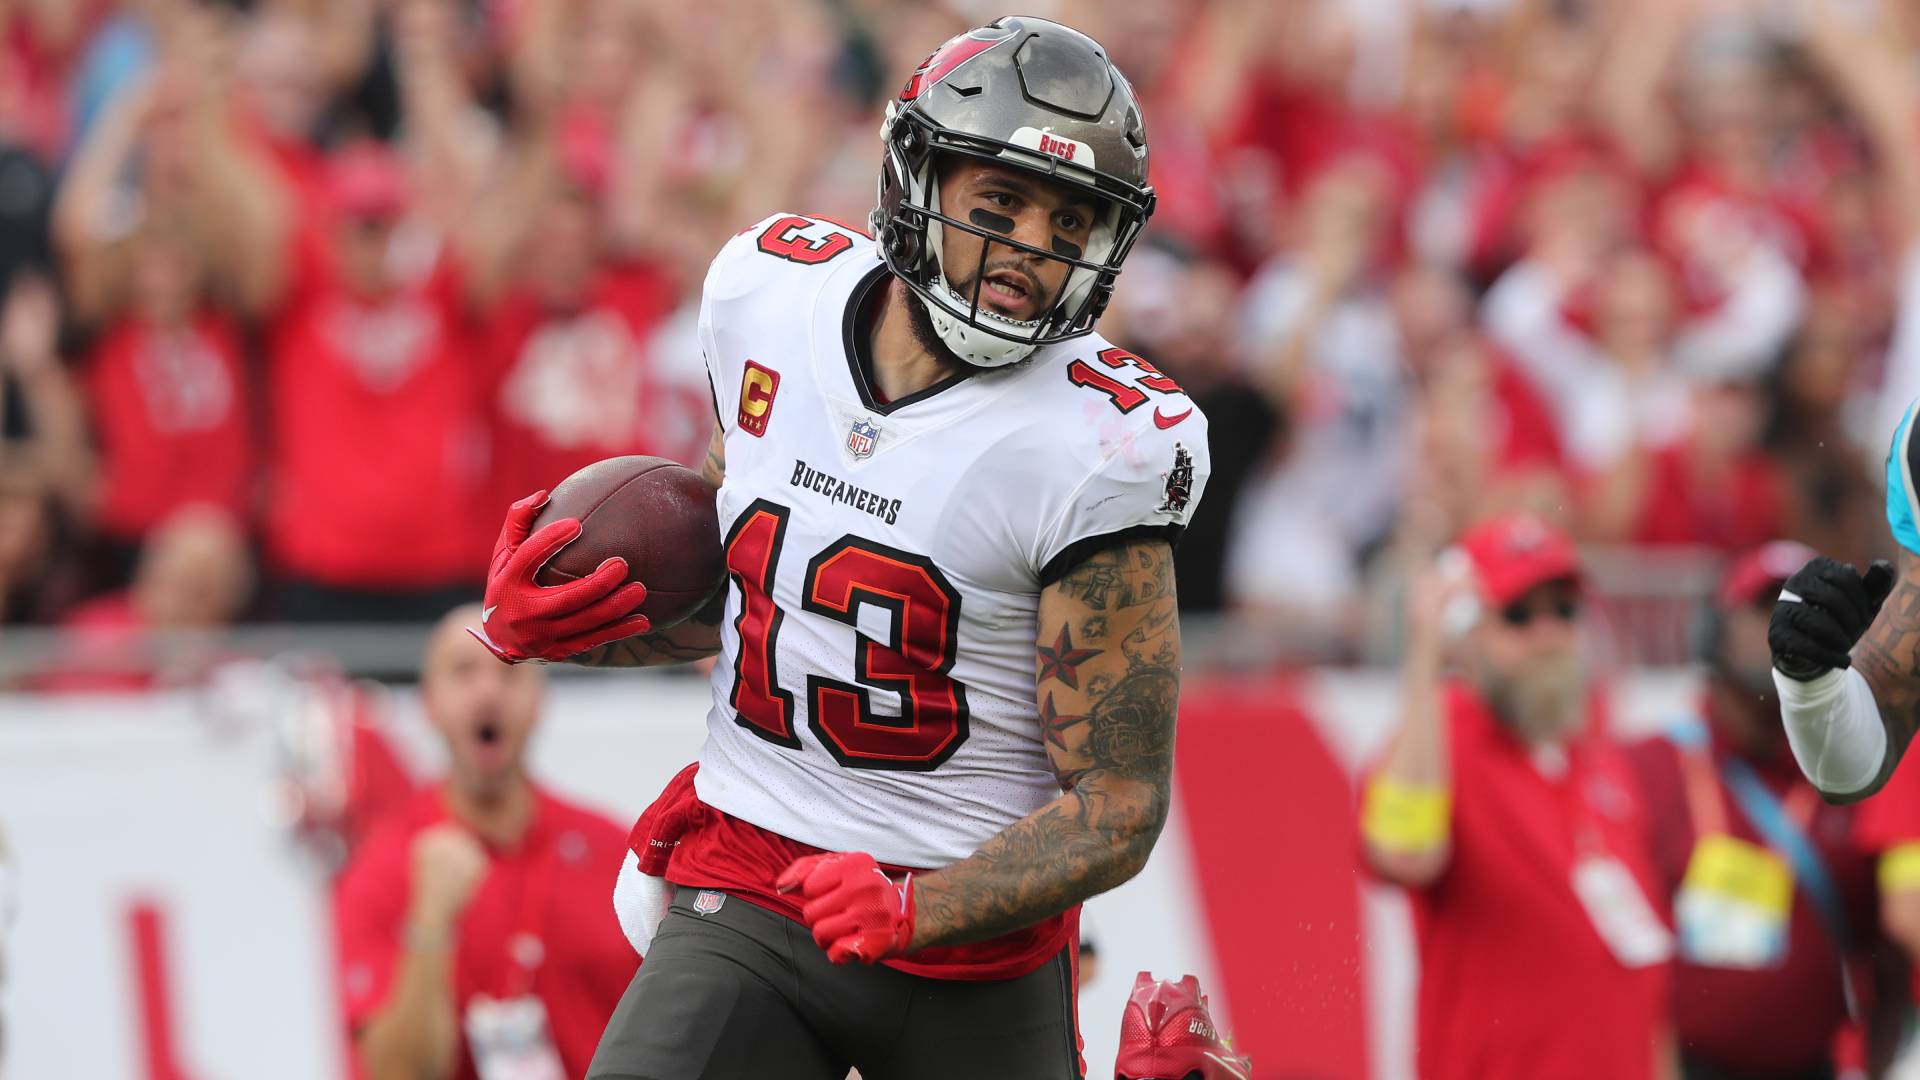 Buccaneers Seal the Deal: Mike Evans' Big Payday Opens Doors for Baker Mayfield's Return